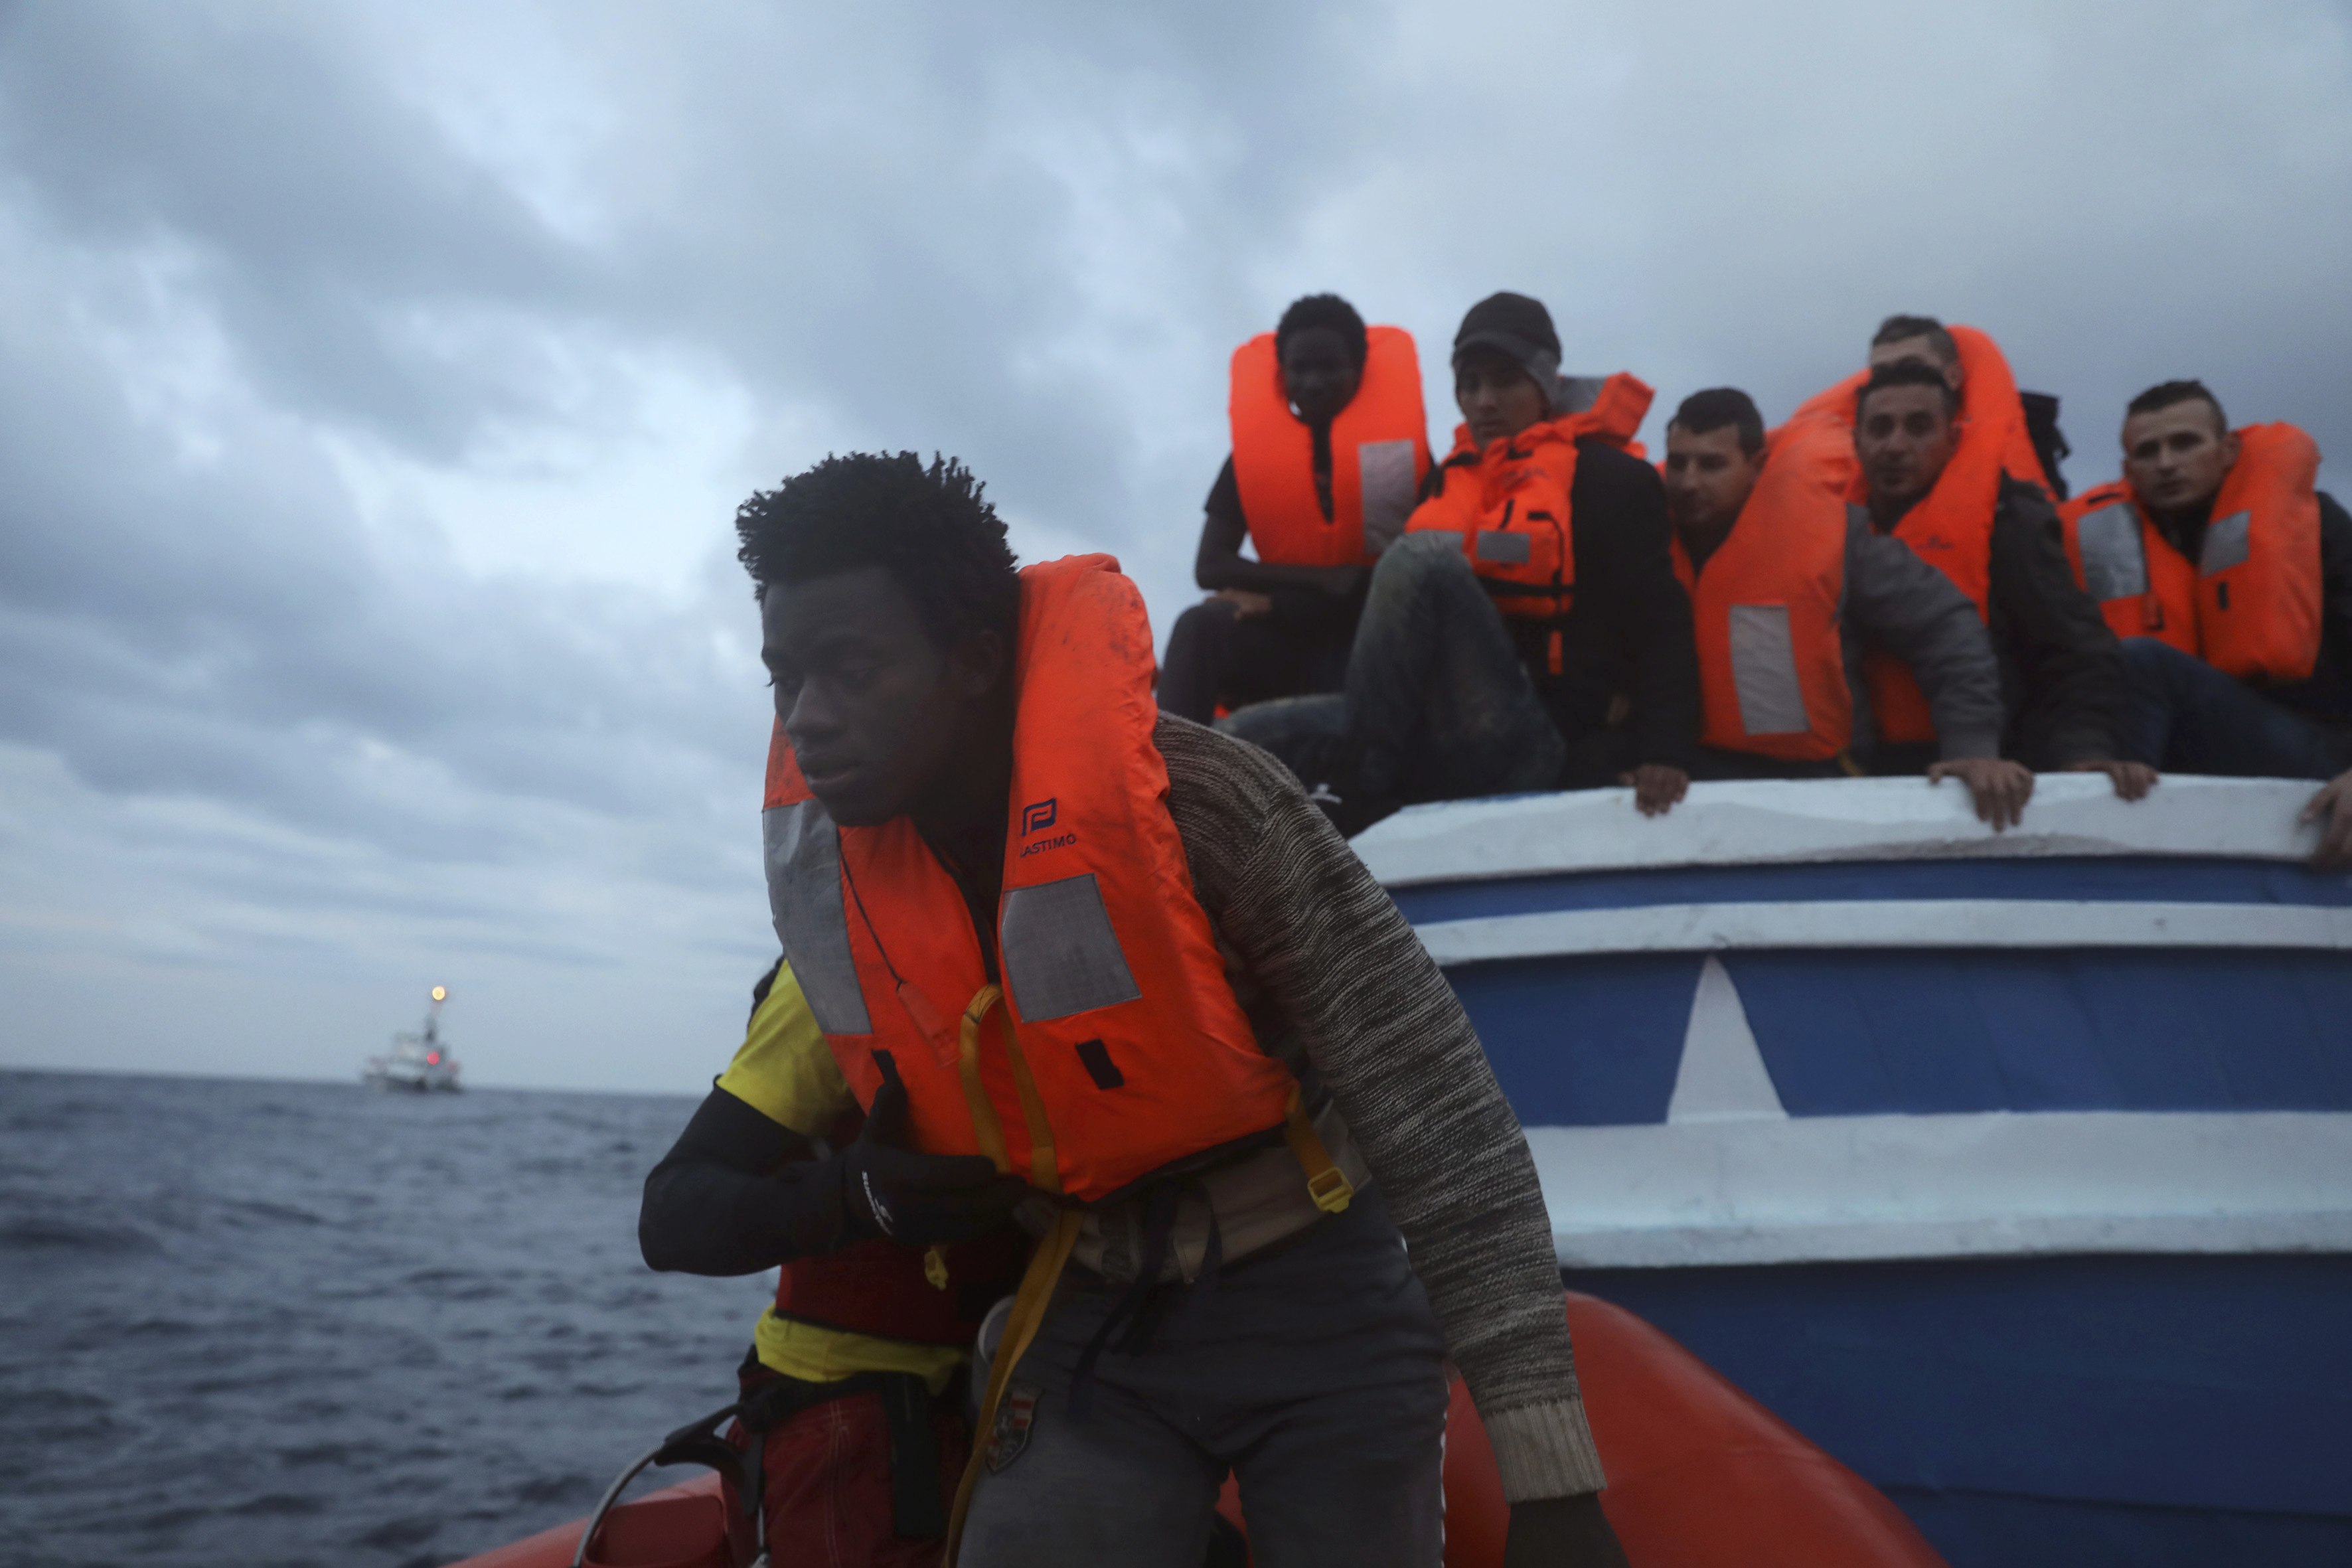 Nearly 150 migrants feared dead after boat sinks, sole survivor says